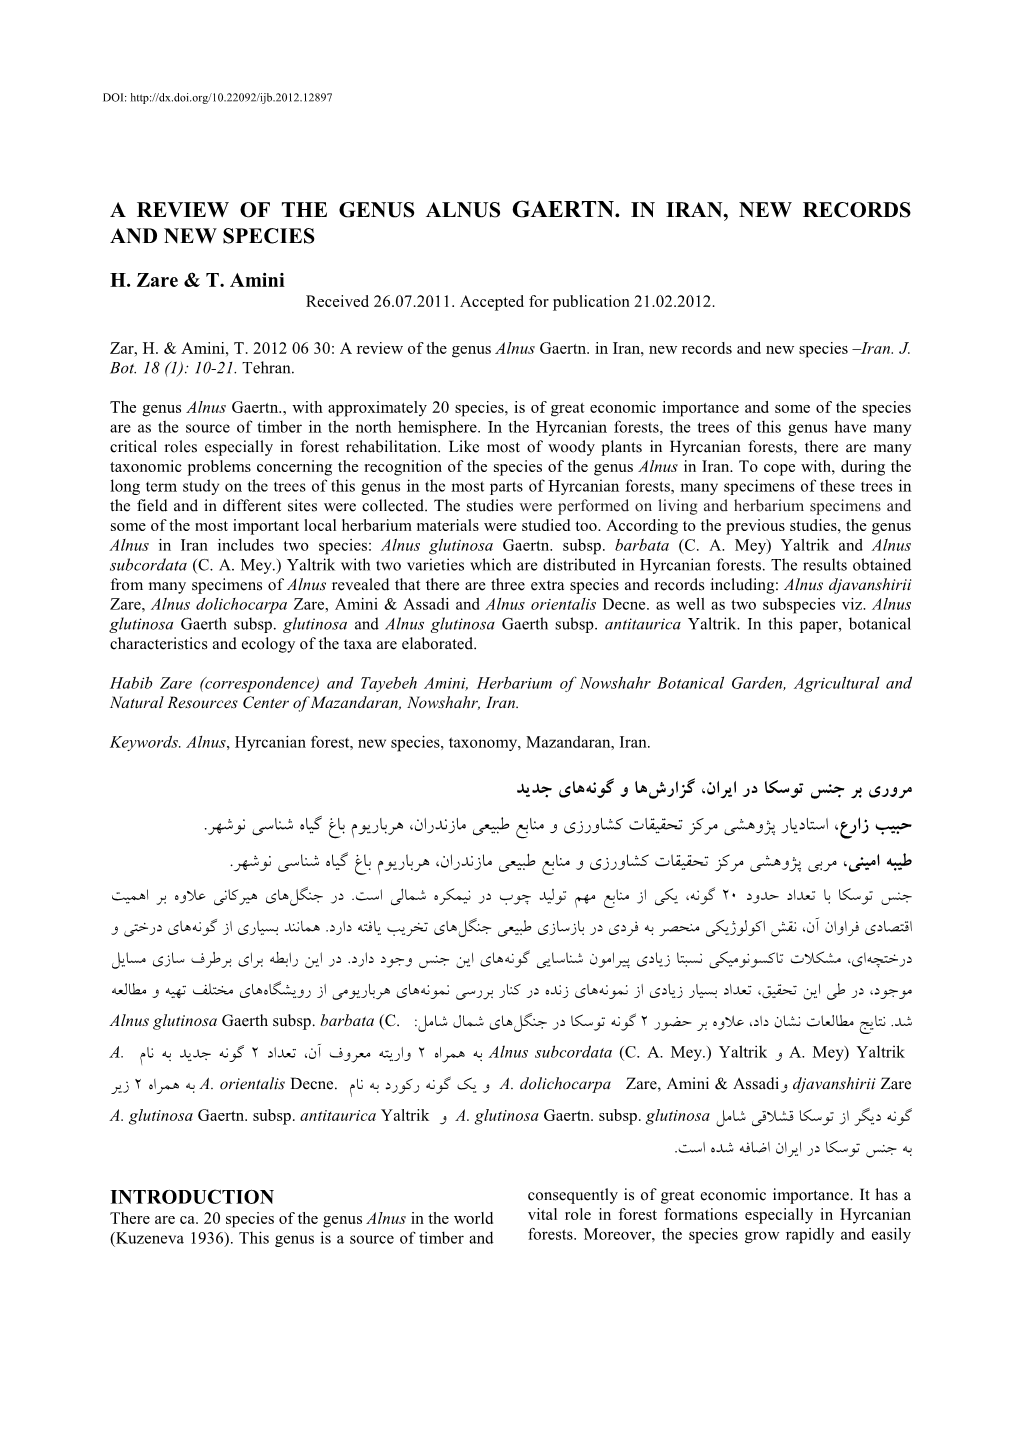 A Review of the Genus Alnus Gaertn. in Iran, New Records and New Species